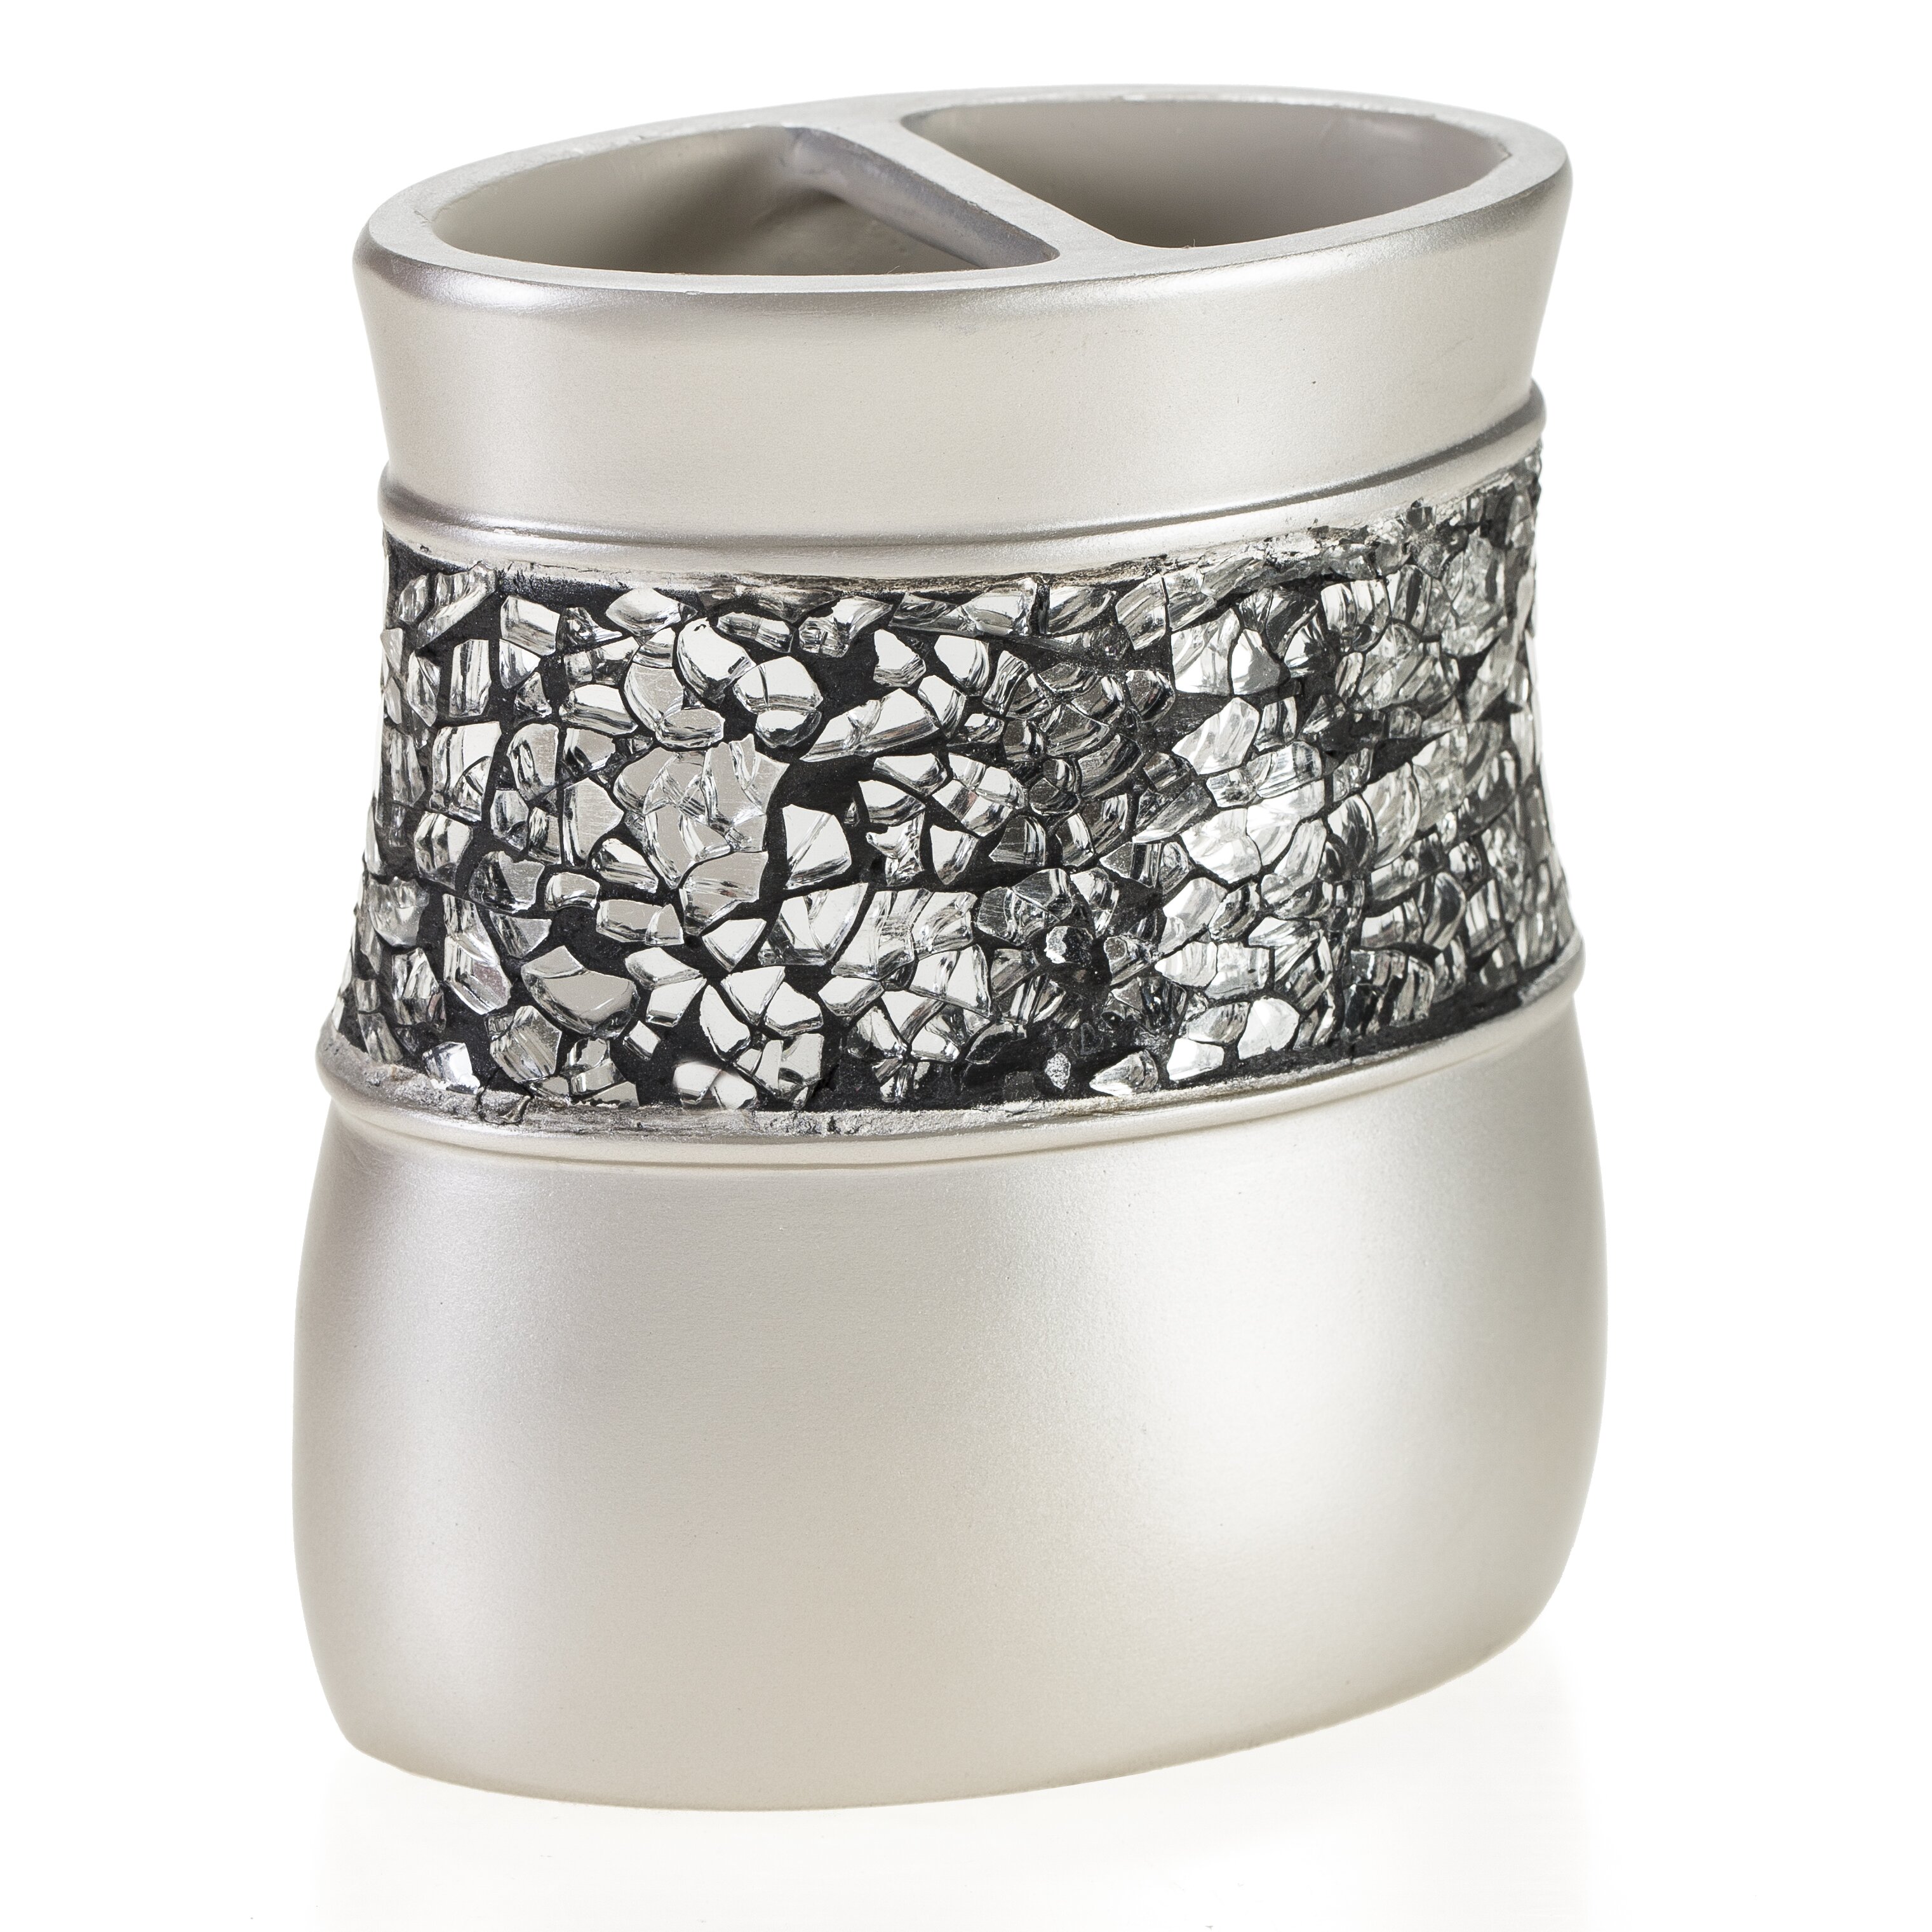 Creative Scents Brushed Nickel Toothbrush Holder & Reviews